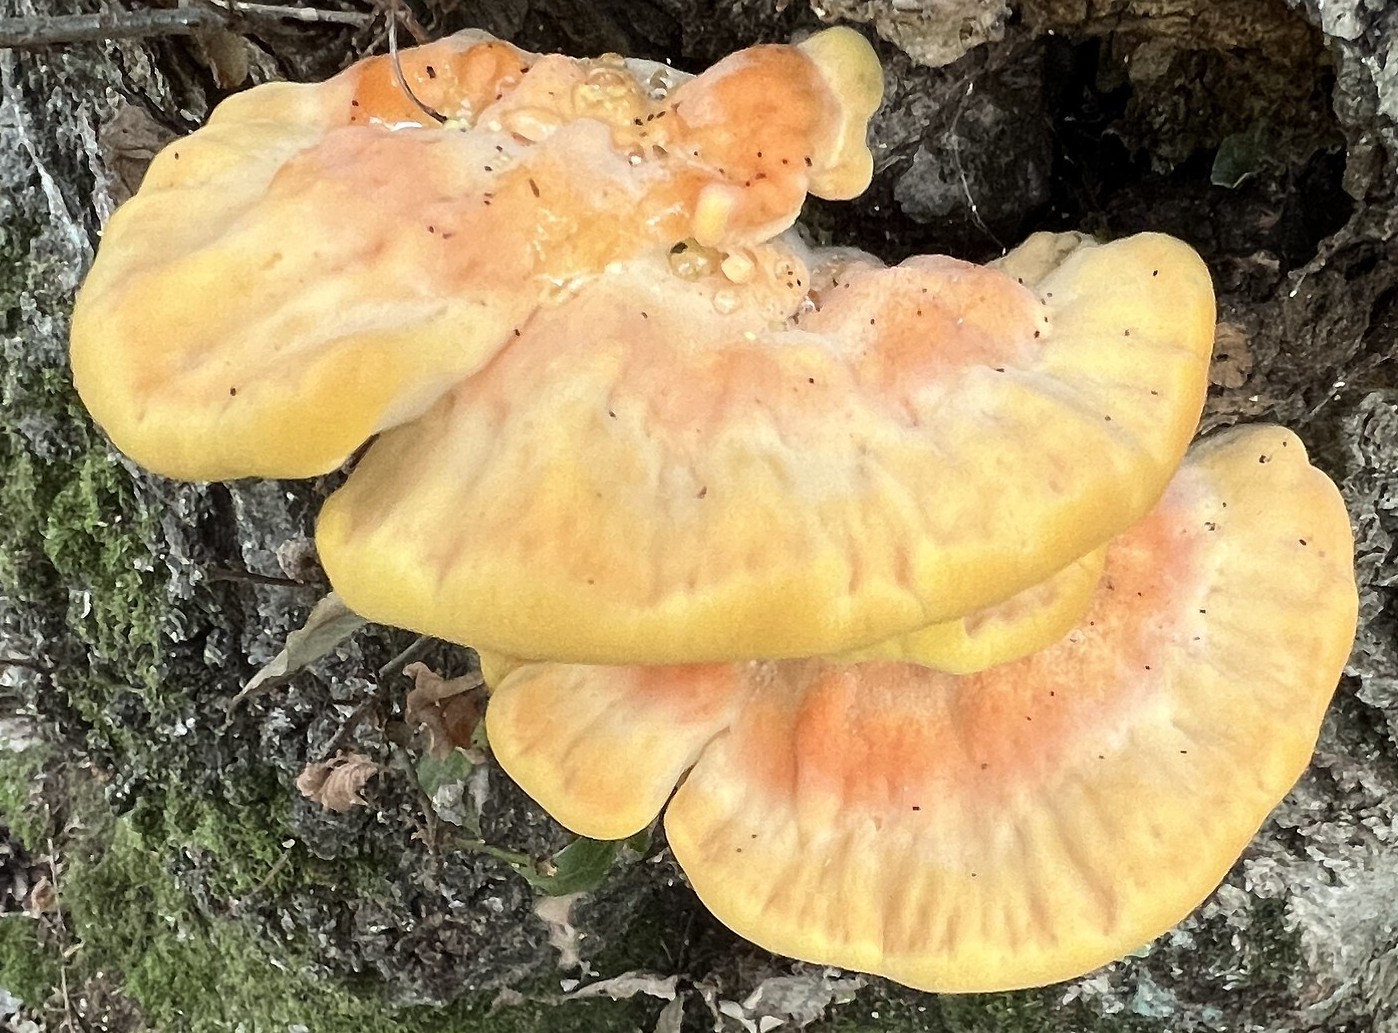 chicken of the woods?